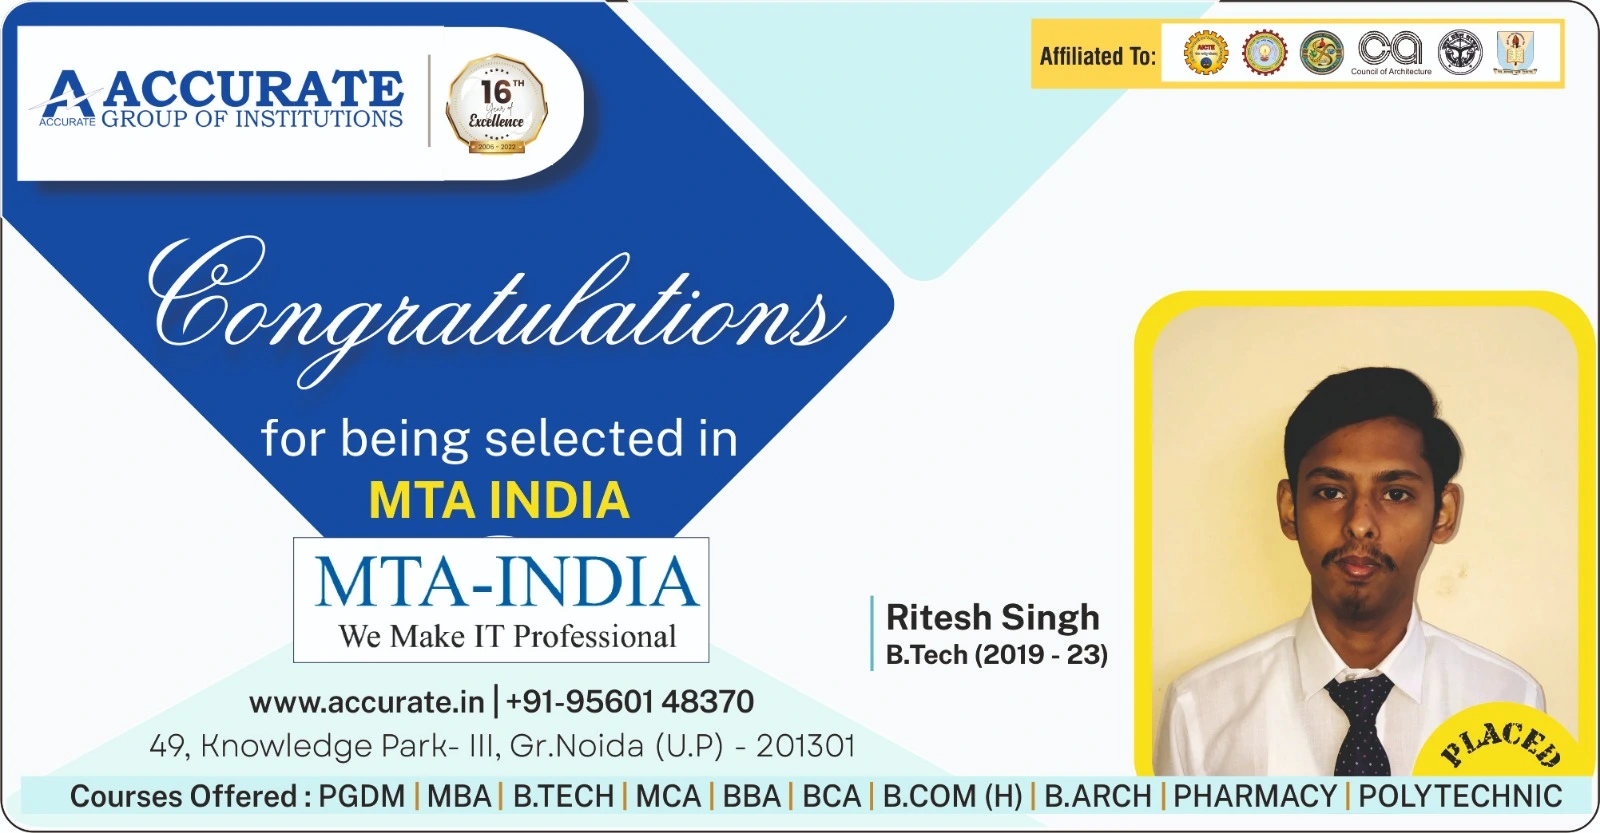 Recent Placement - Ritesh Singh, B.Tech Batch 2019-2023, Selected by MTA India.